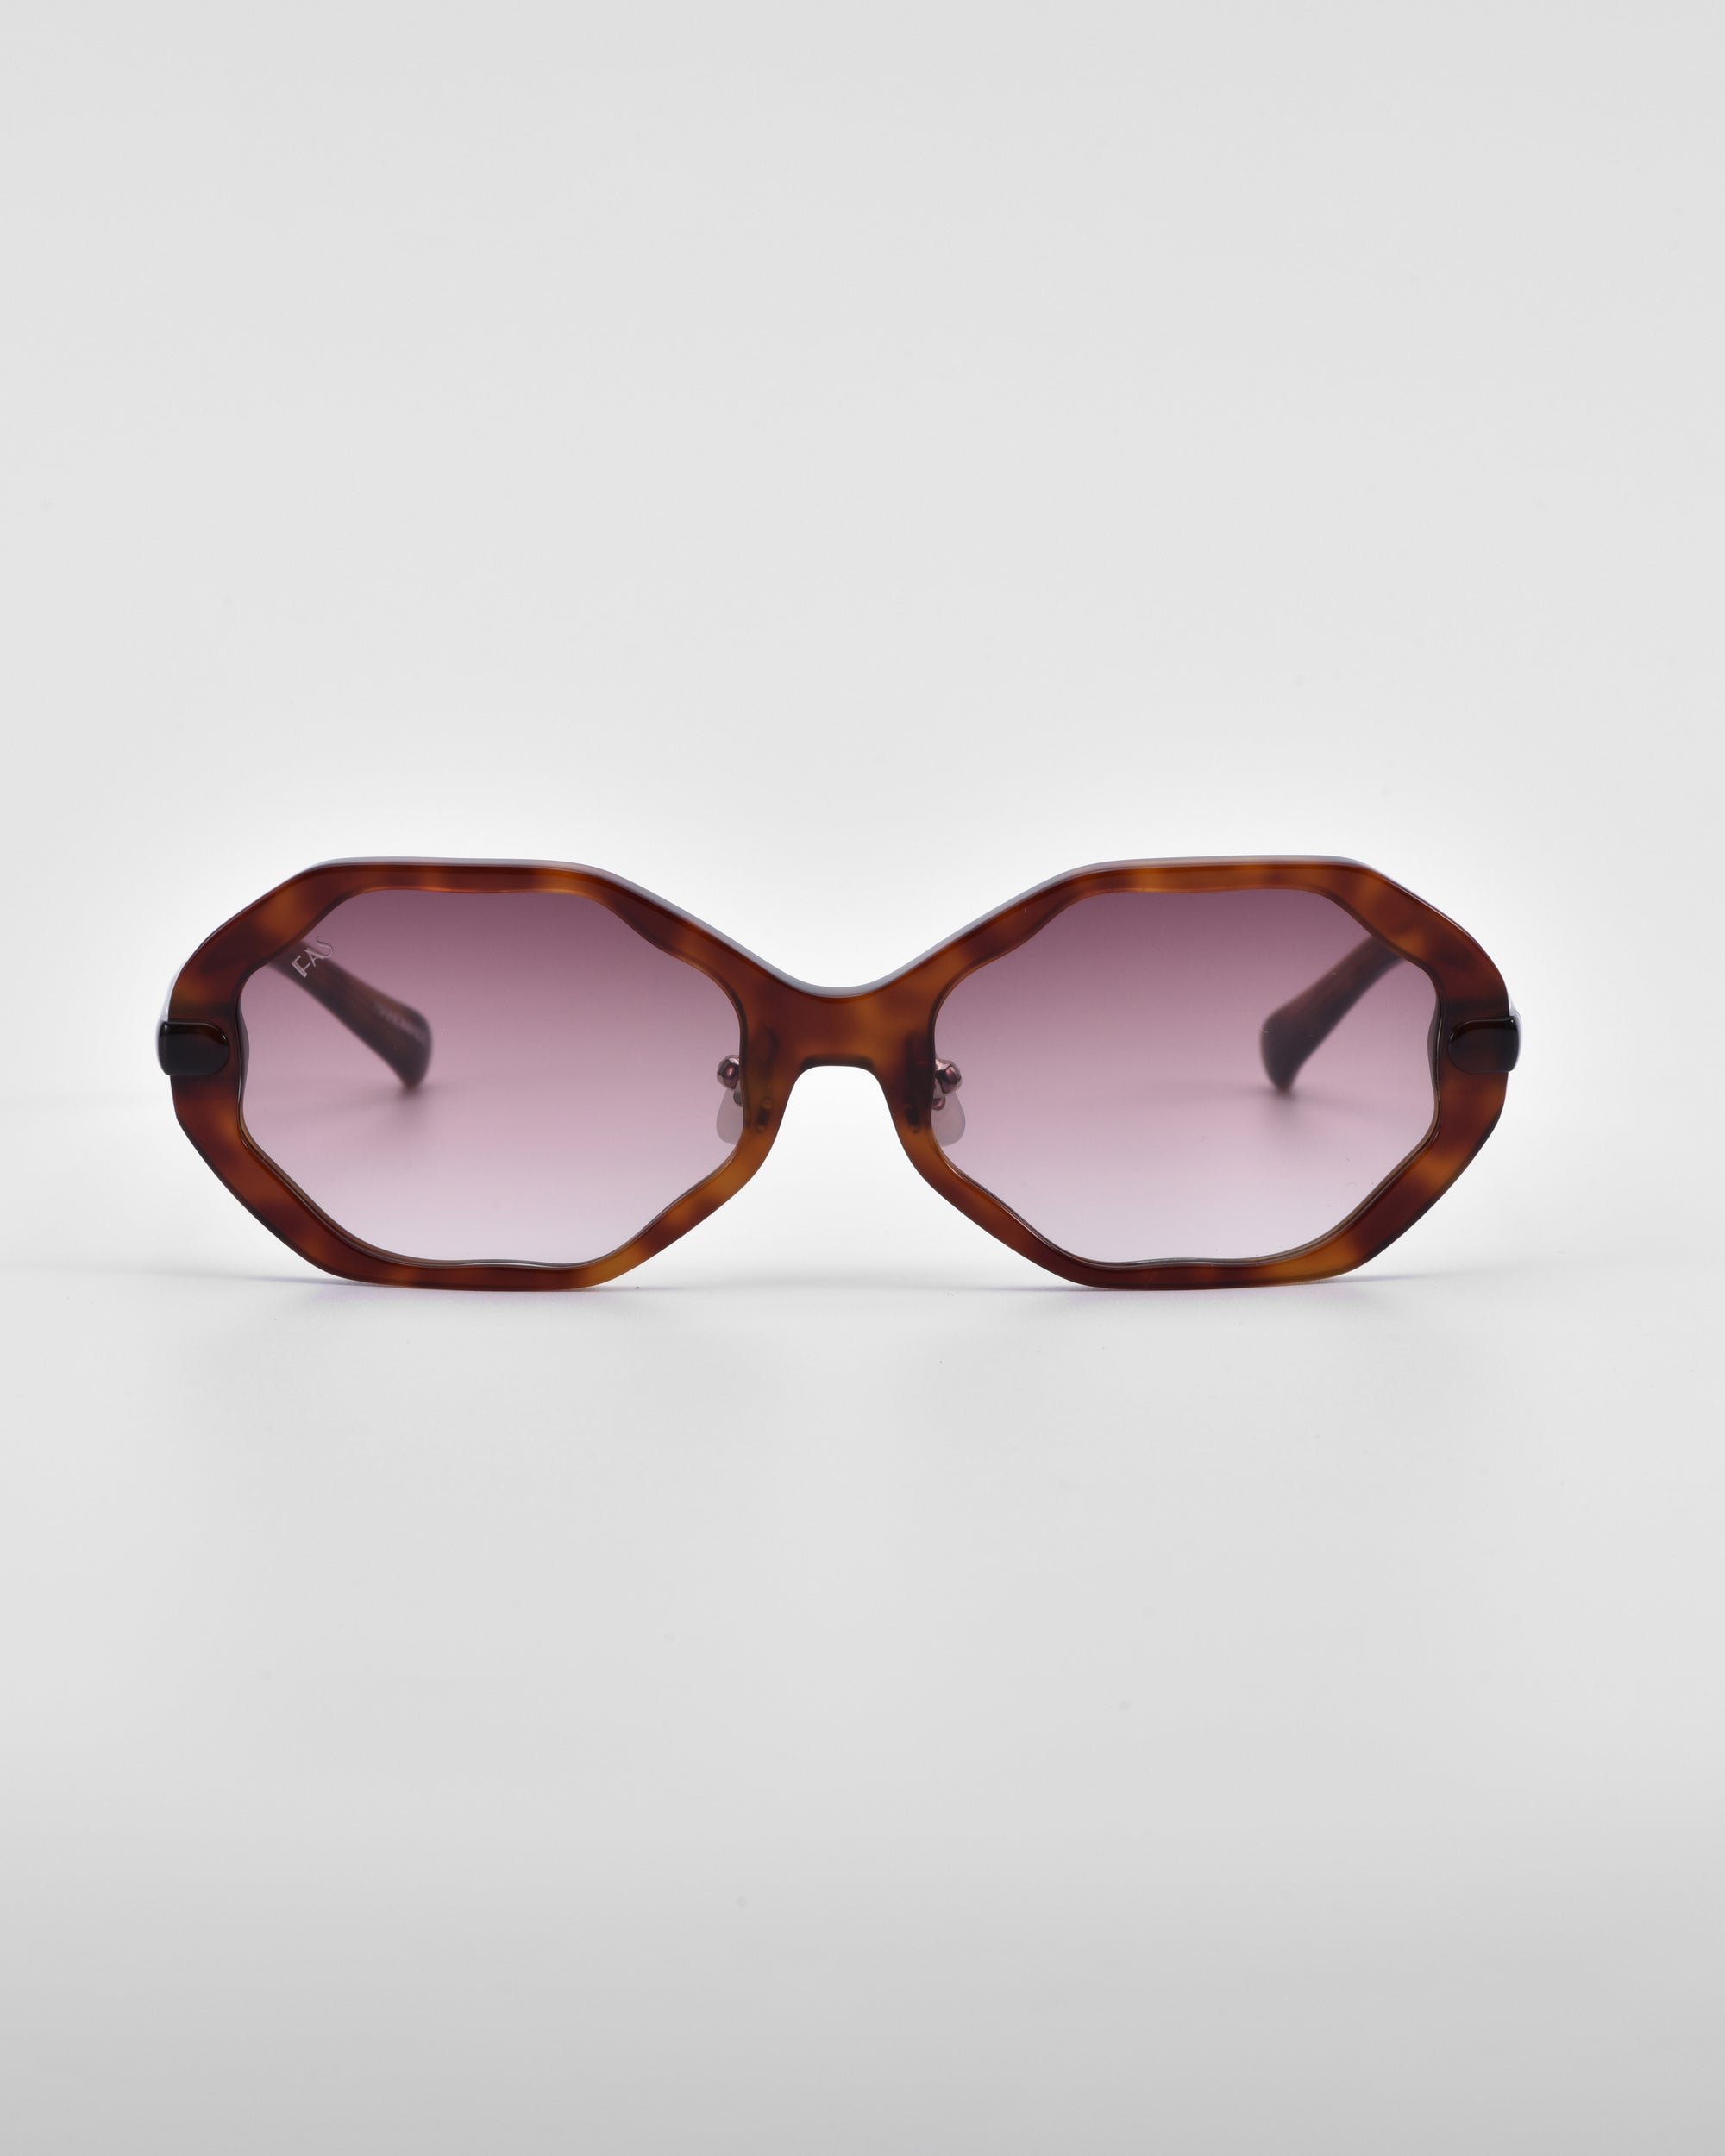 Front view of a pair of Lotus sunglasses by For Art's Sake® with an angular silhouette, featuring tortoiseshell frames and pink-tinted lenses, complemented by jade-stone nose pads. The sunglasses are placed on a plain white background.